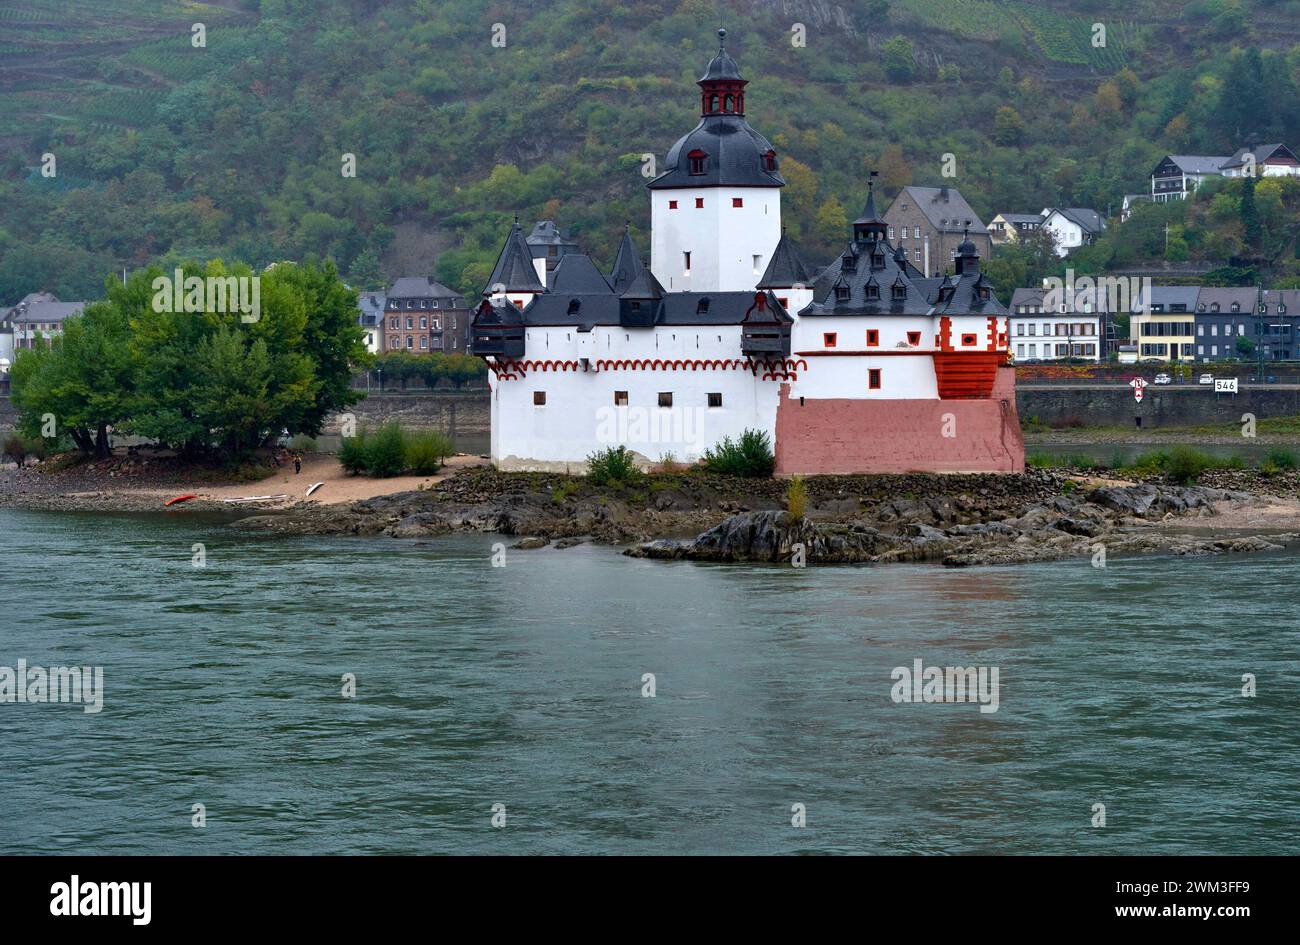 View in the valley of Rhine river on a rainy day Stock Photo